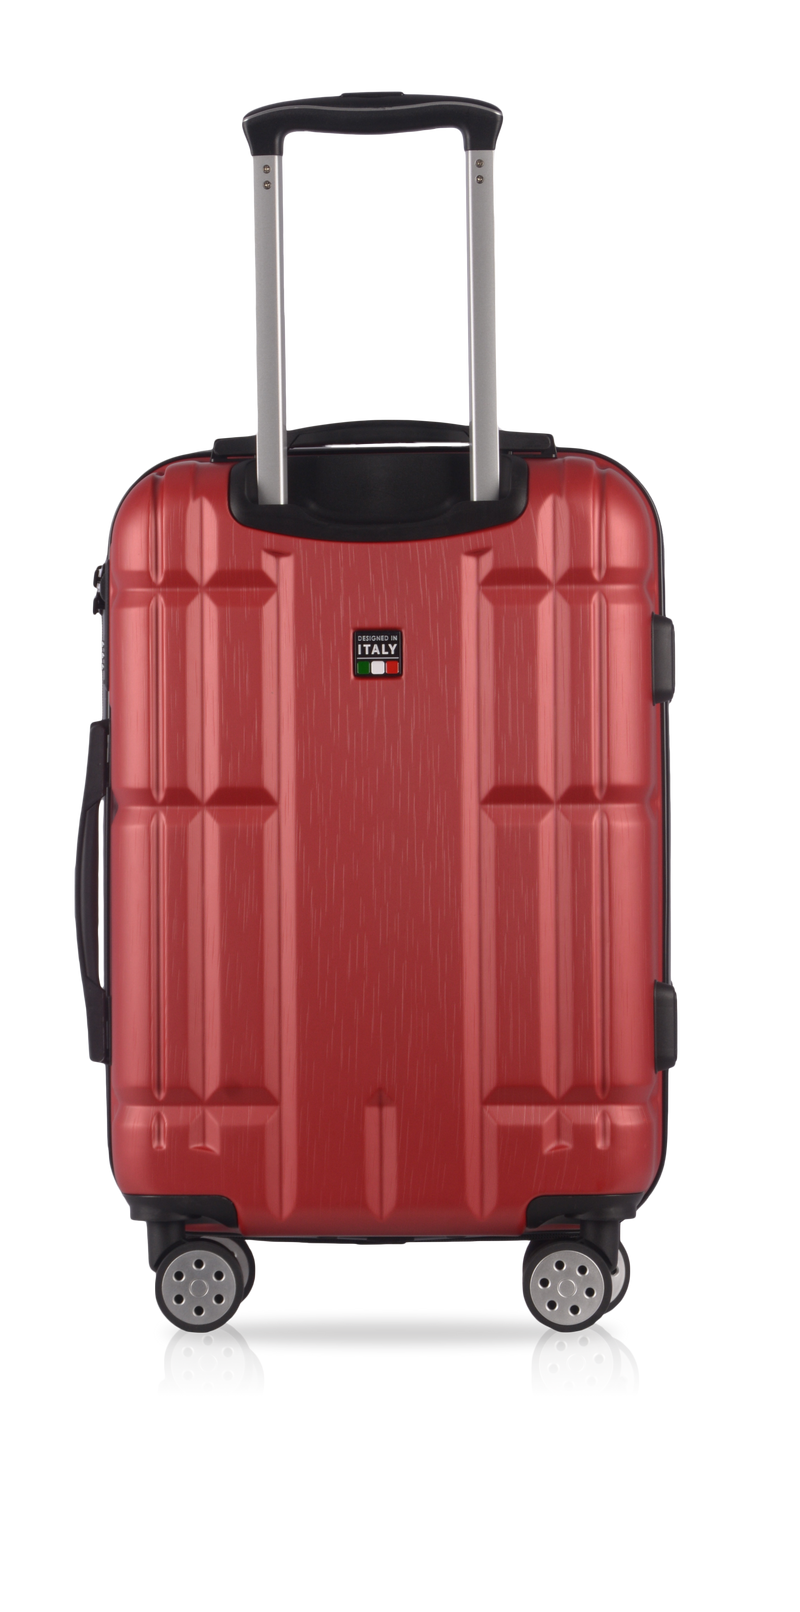 TUCCI Italy MASSA ABS 20" Carry On Luggage Suitcase